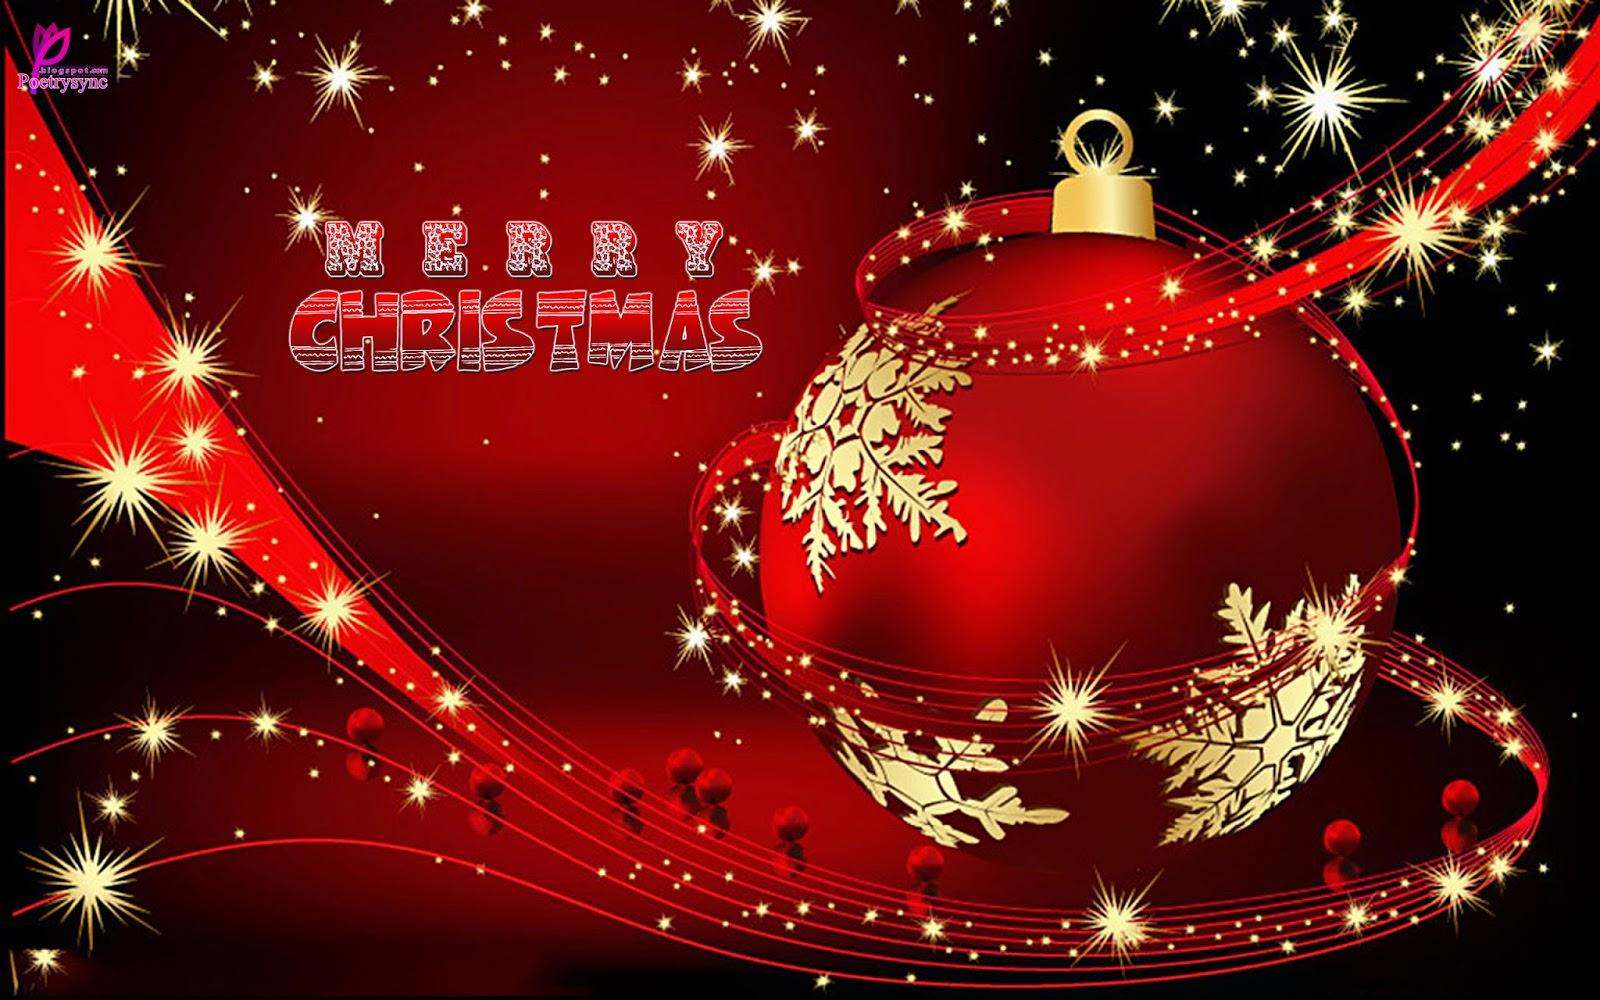 Merry Christmas Balls Wishes Full HD Wallpaper Download Free